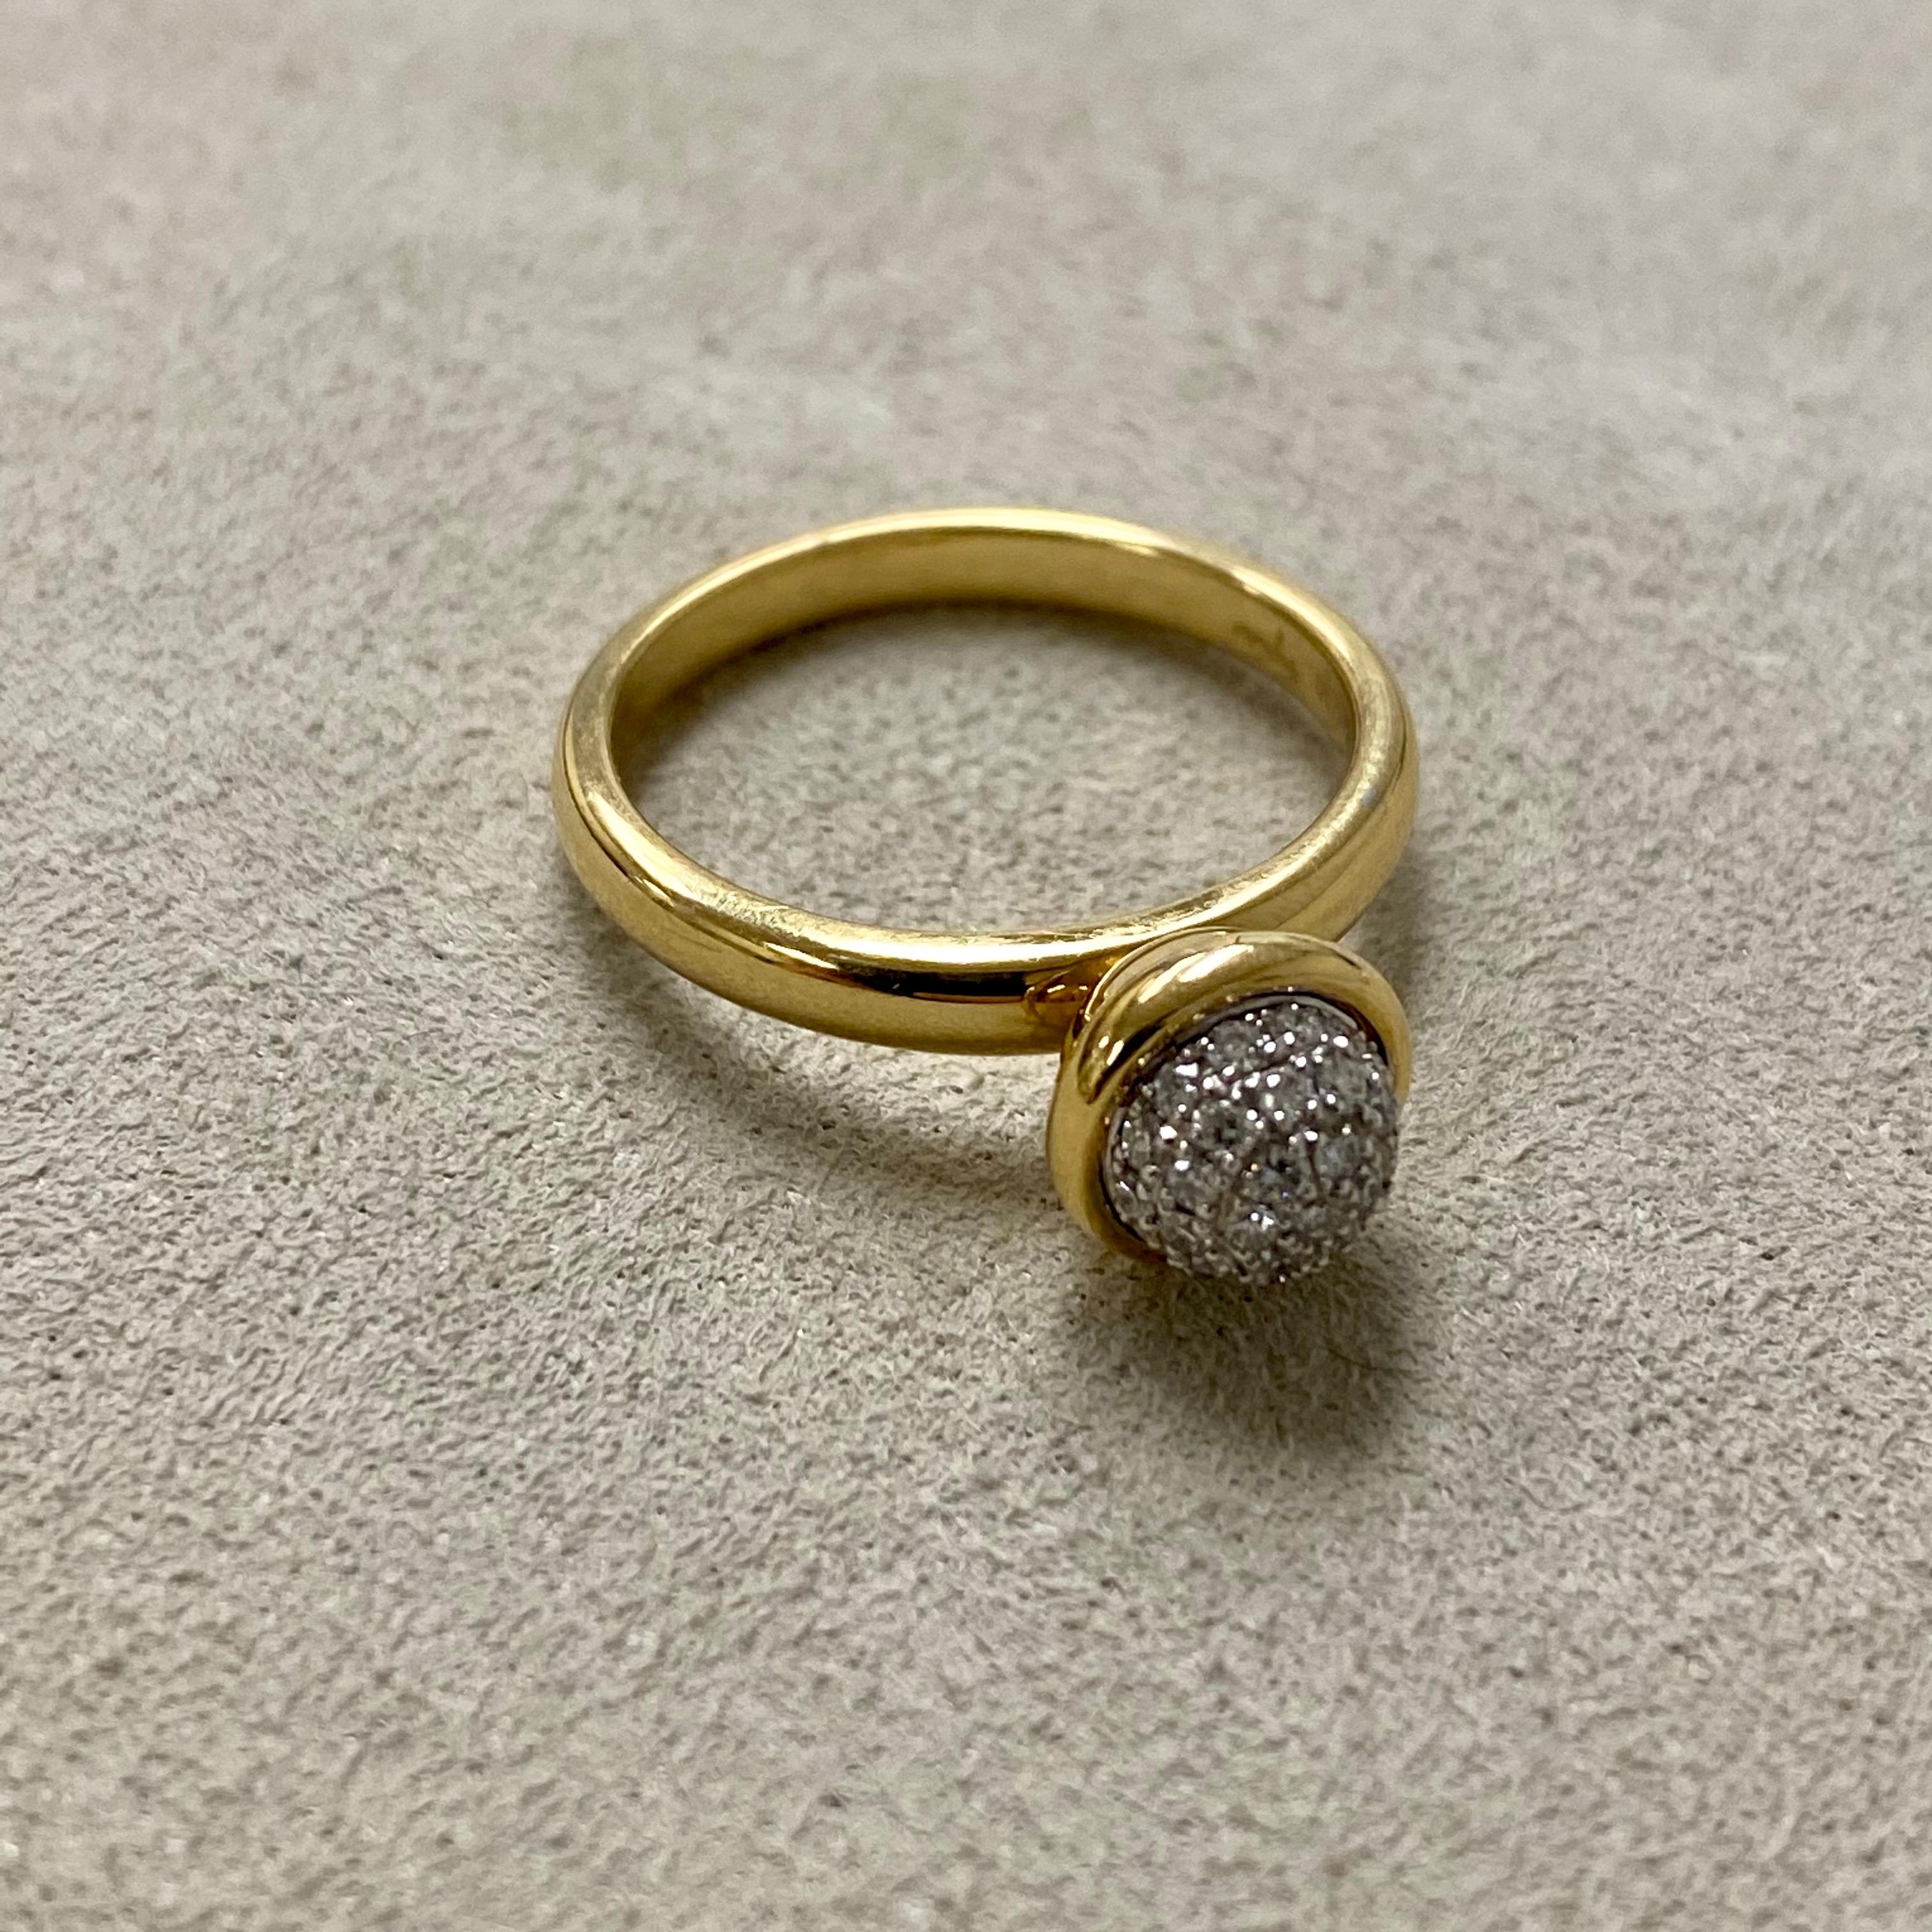 Created in 18 karat yellow gold
Diamonds 0.30 carat approx.
Diamond pave ring 8 mm diameter approx.
Ring size US 6.5, can be sized upon request.

Exquisitely handcrafted in 18-karat yellow gold, this diamond-pave ring features 0.30 carats of